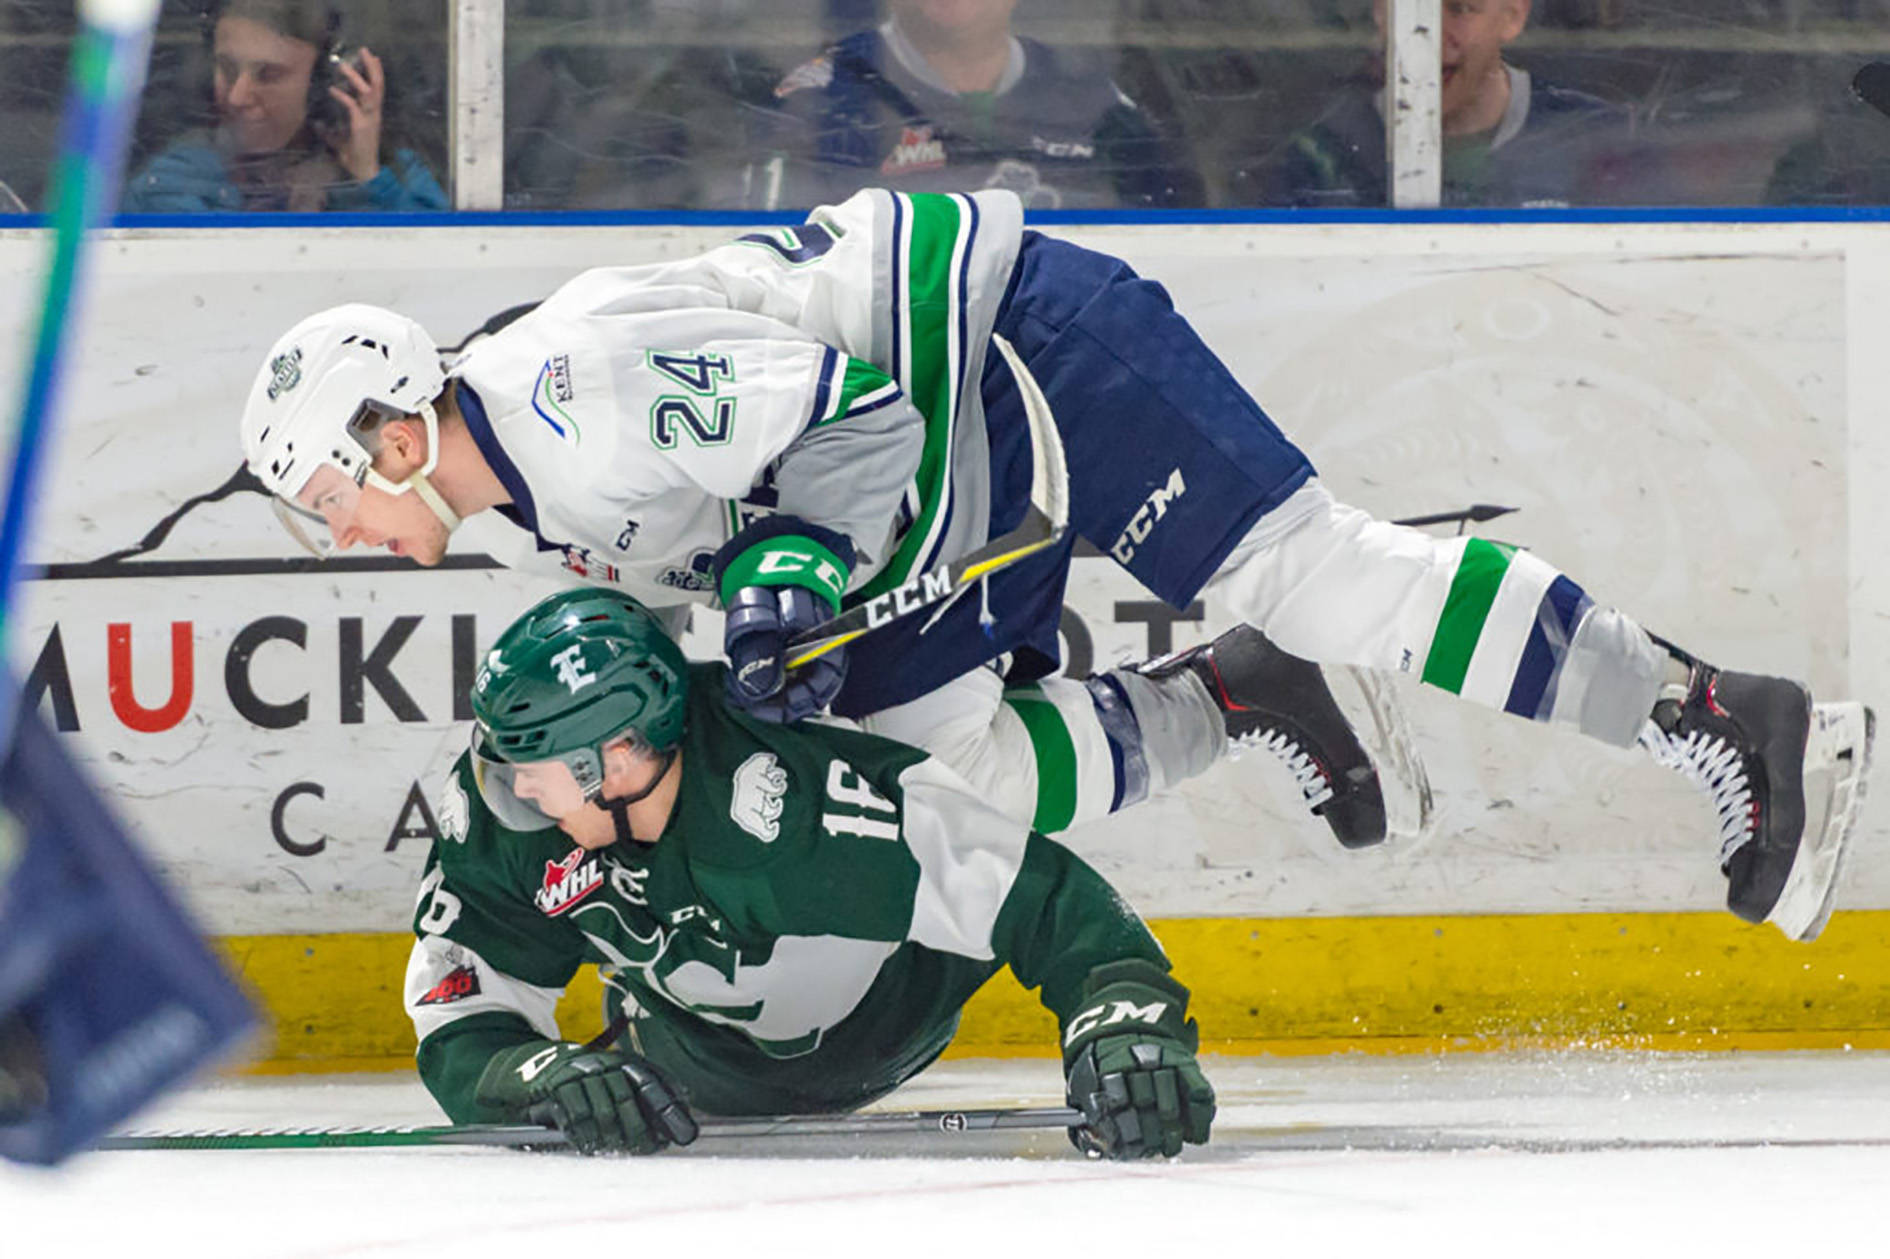 The Thunderbirds’ Jake Lee collides with the Silvertips’ Luke Ormsby along the boards during WHL play Friday night. COURTESY PHOTO, Brian Liesse, T-Birds